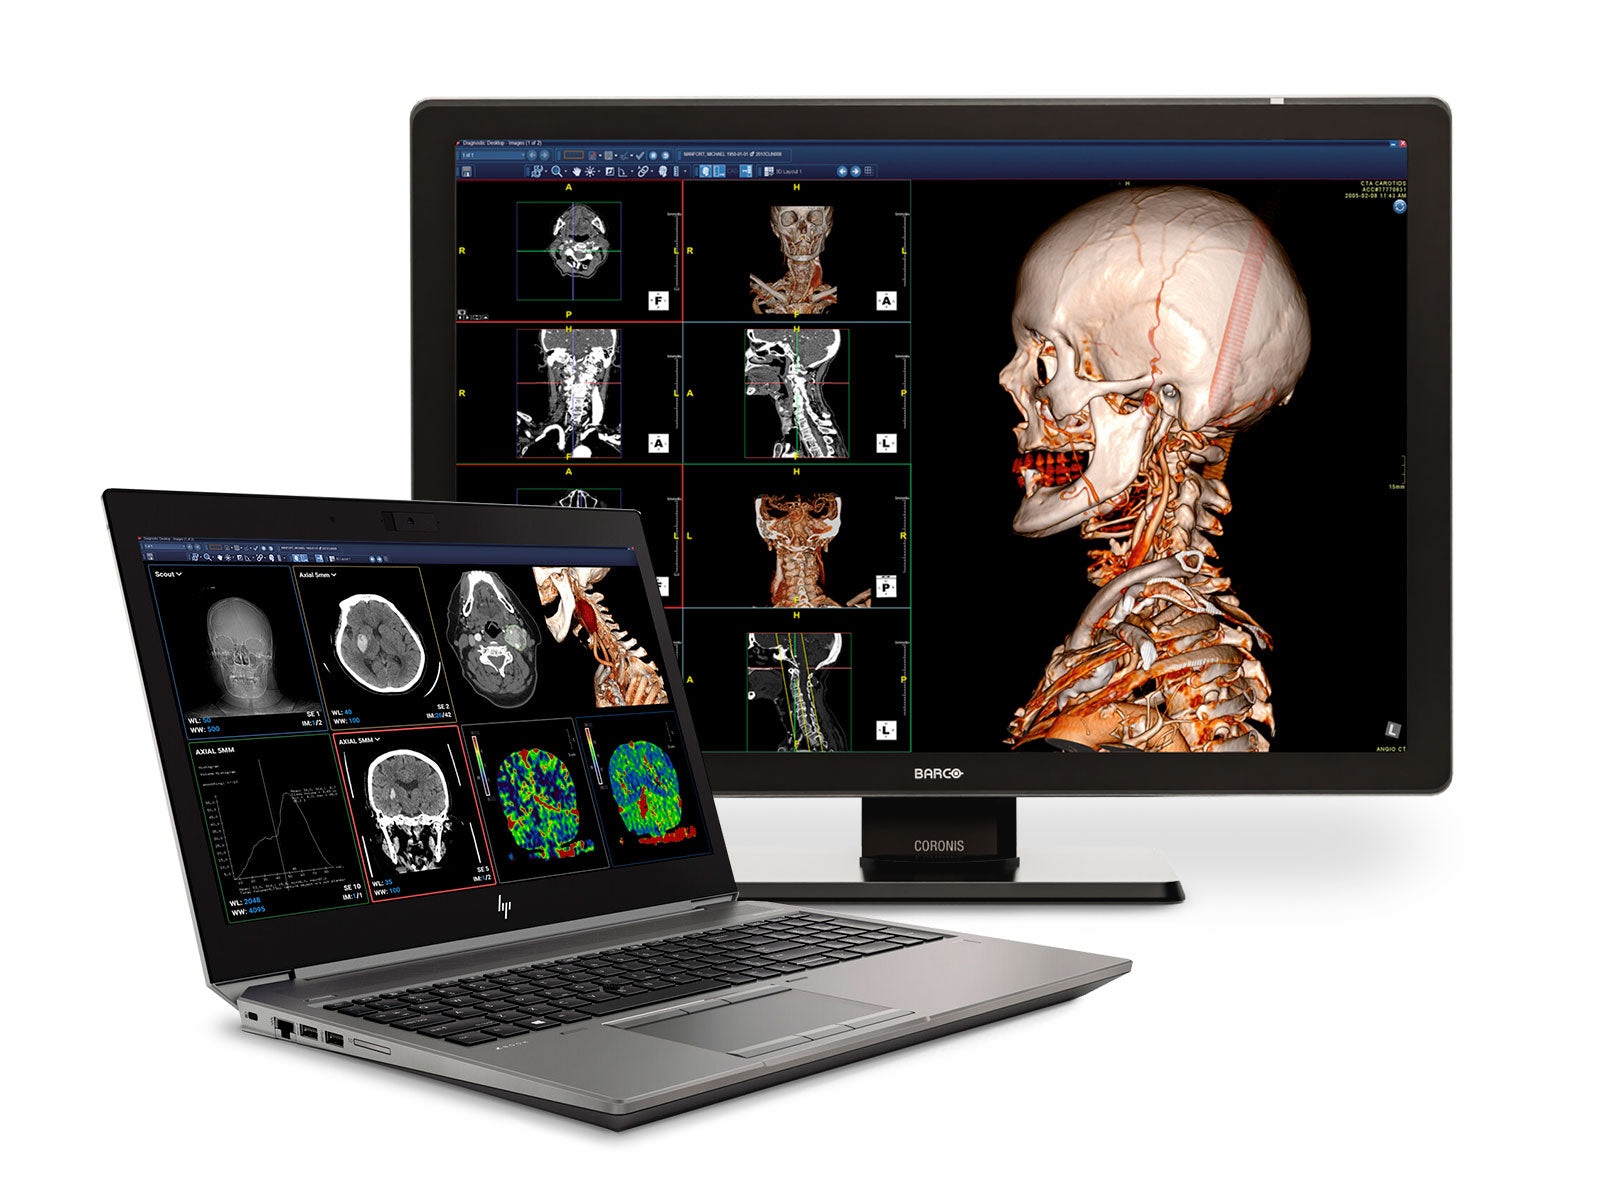 HP ZBook Fury 15 G6 Mobile Radiology Workstation | 15.6" Full HD LED | Intel i7-9750H @ 4.50GHz | 6-Core | 32GB DDR4 | 512GB NVMe SSD | NVIDIA Quadro T1000 4GB | Win10 Pro